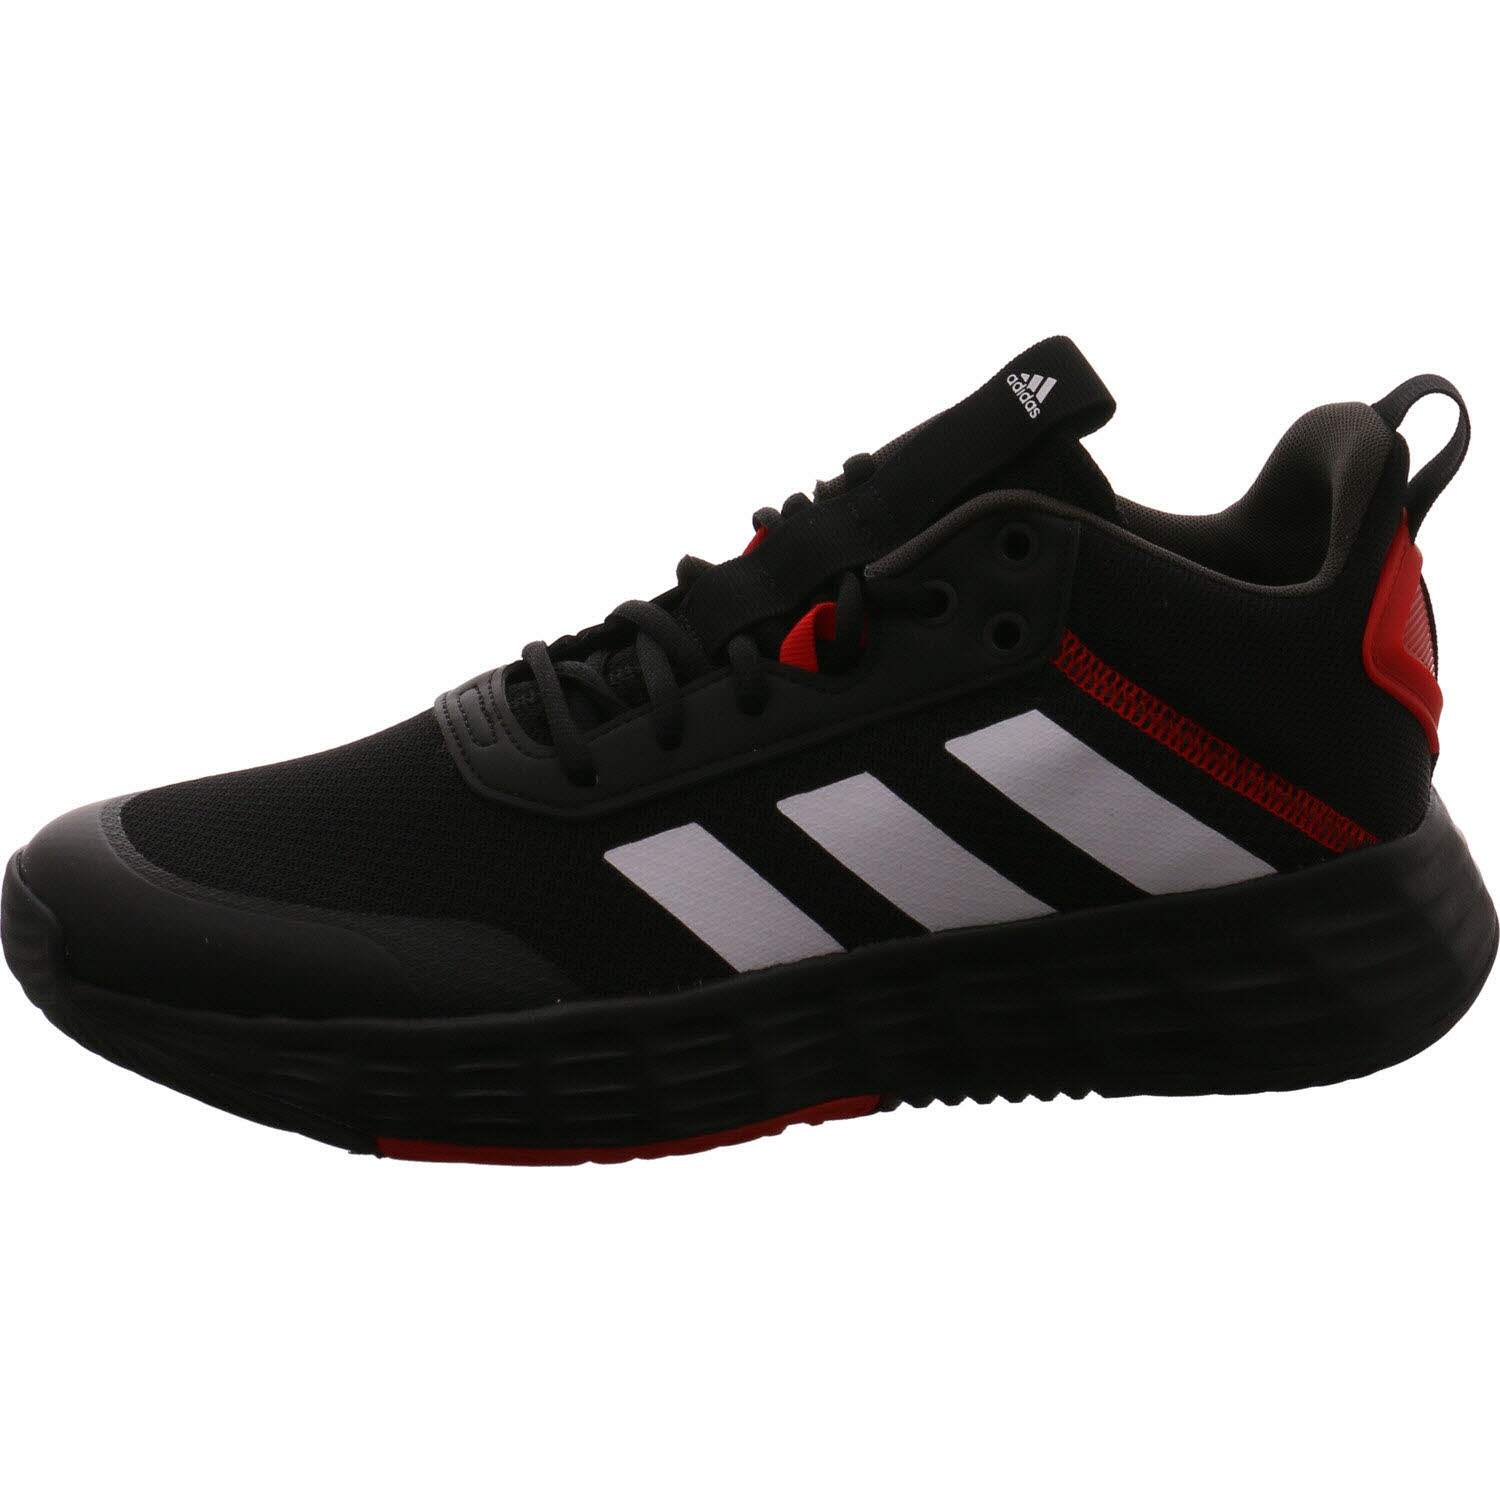 Adidas Sneaker low ownthegame 2.0